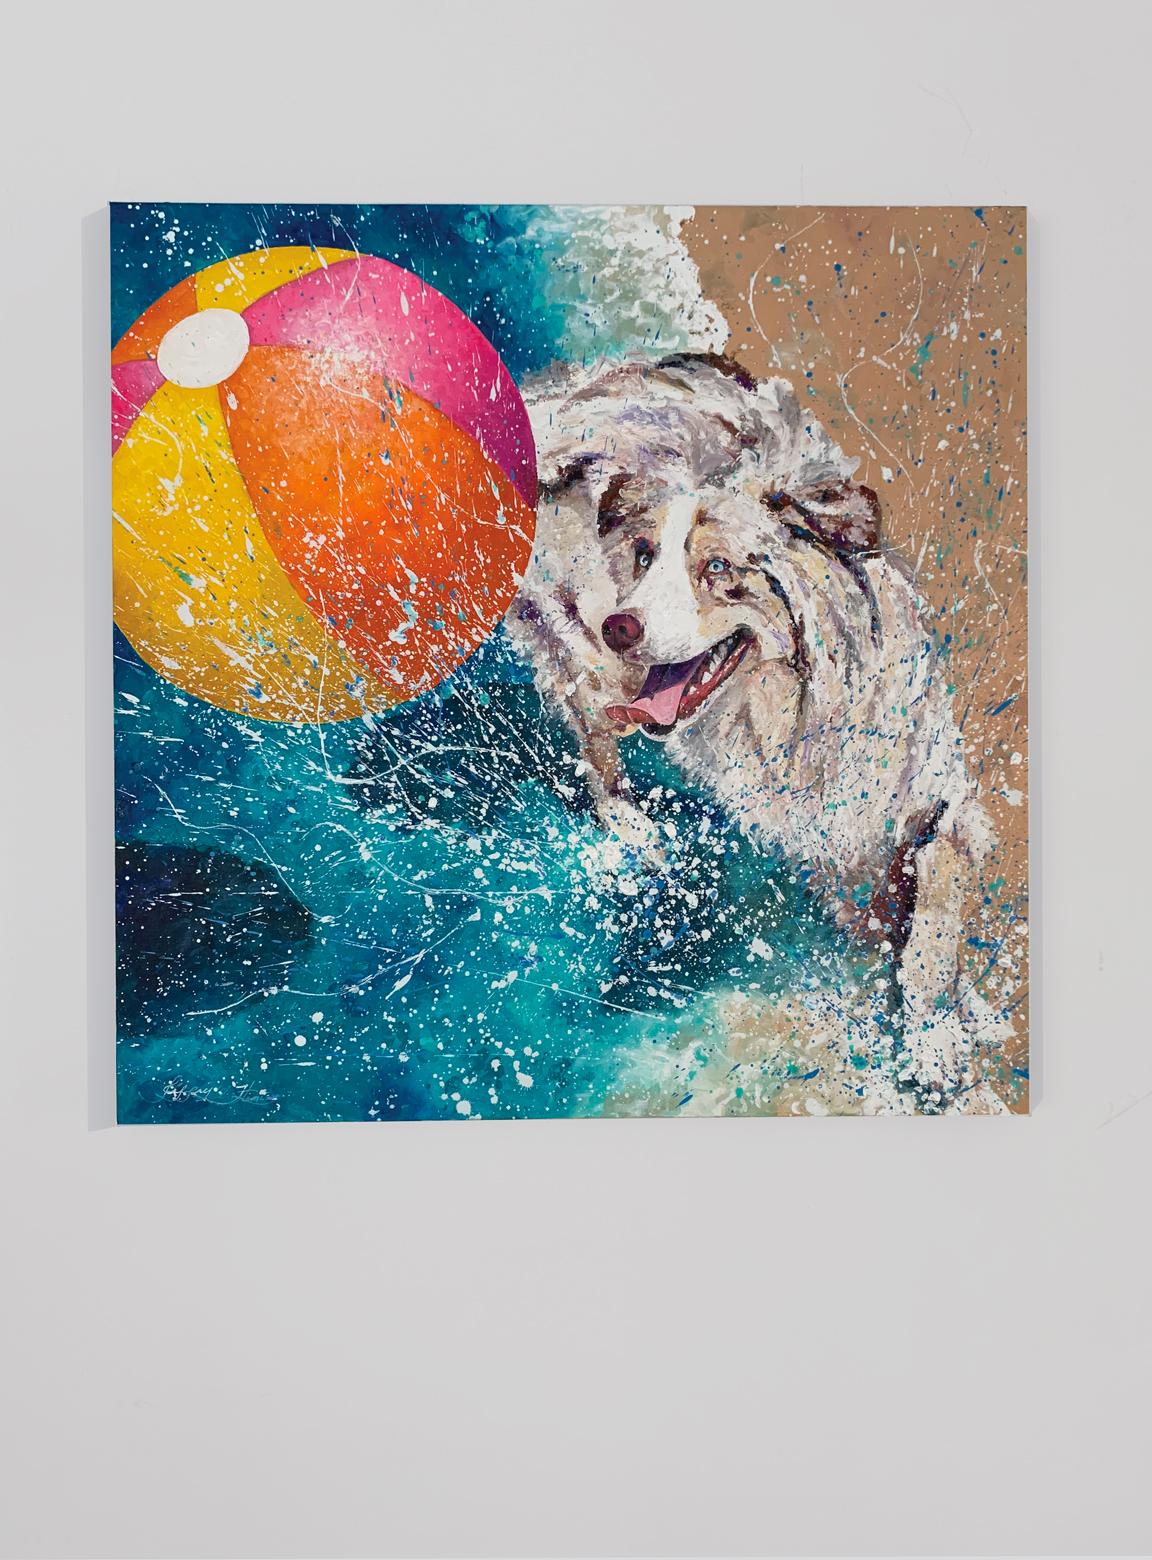 <p>Artist Comments<br />Inspired by a photo of an Australian Shepherd, artist Jeff Fleming added a beachball and splashing water to energize the composition. Jeff describes his painting style as kinetic impressionism. 